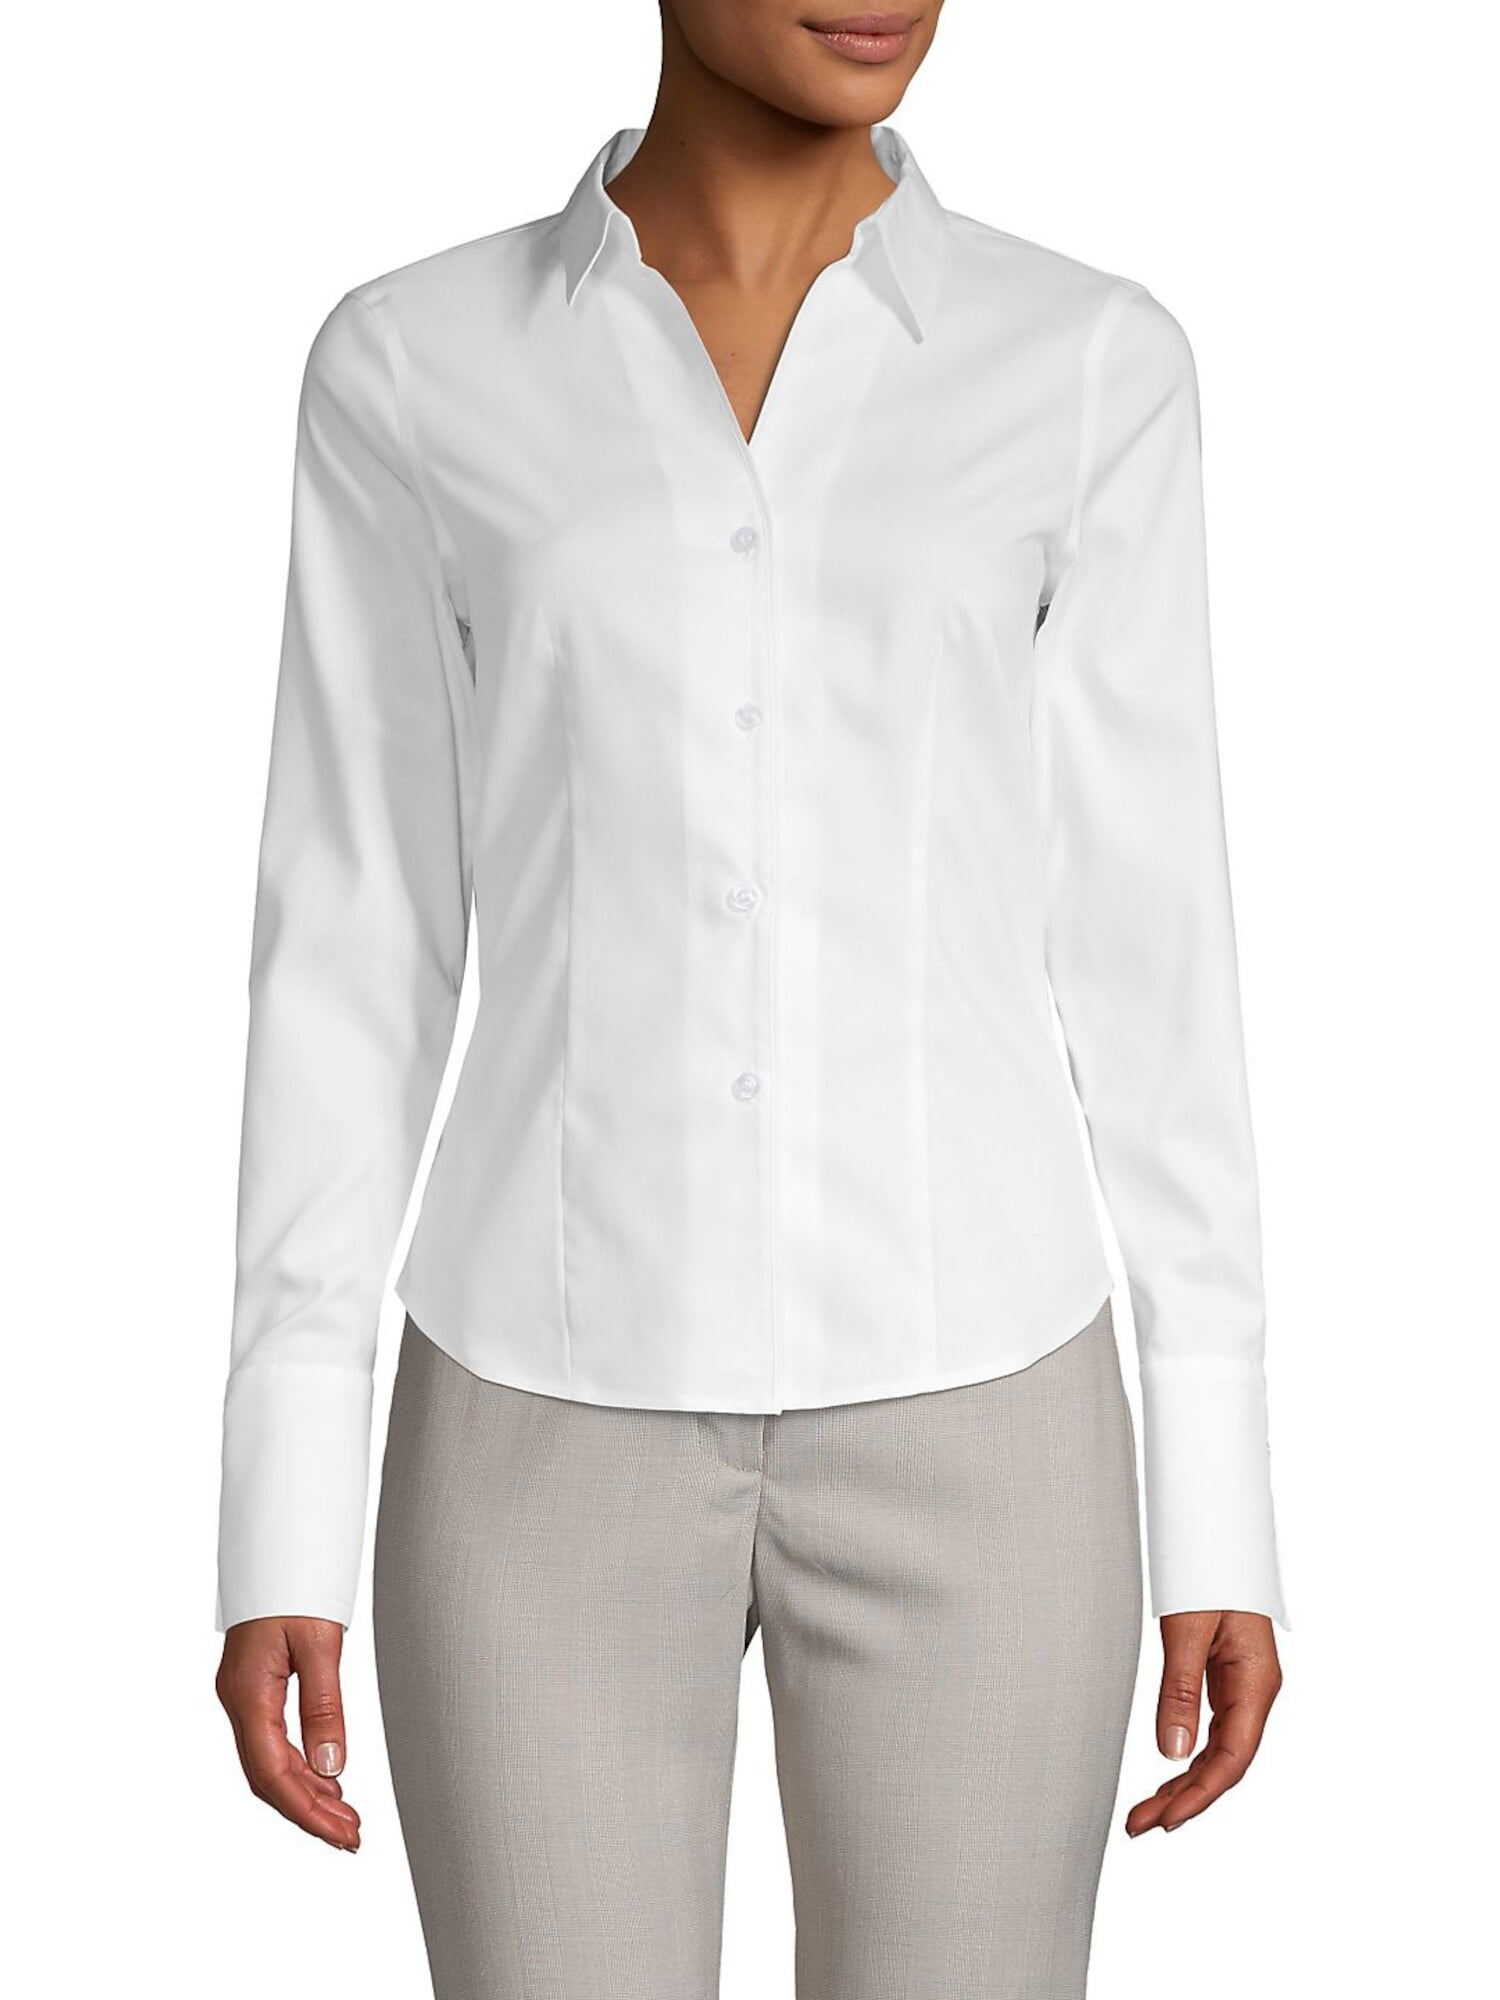 CALVIN KLEIN Womens White Long Sleeve Collared Button Up Top Petites 4P -  